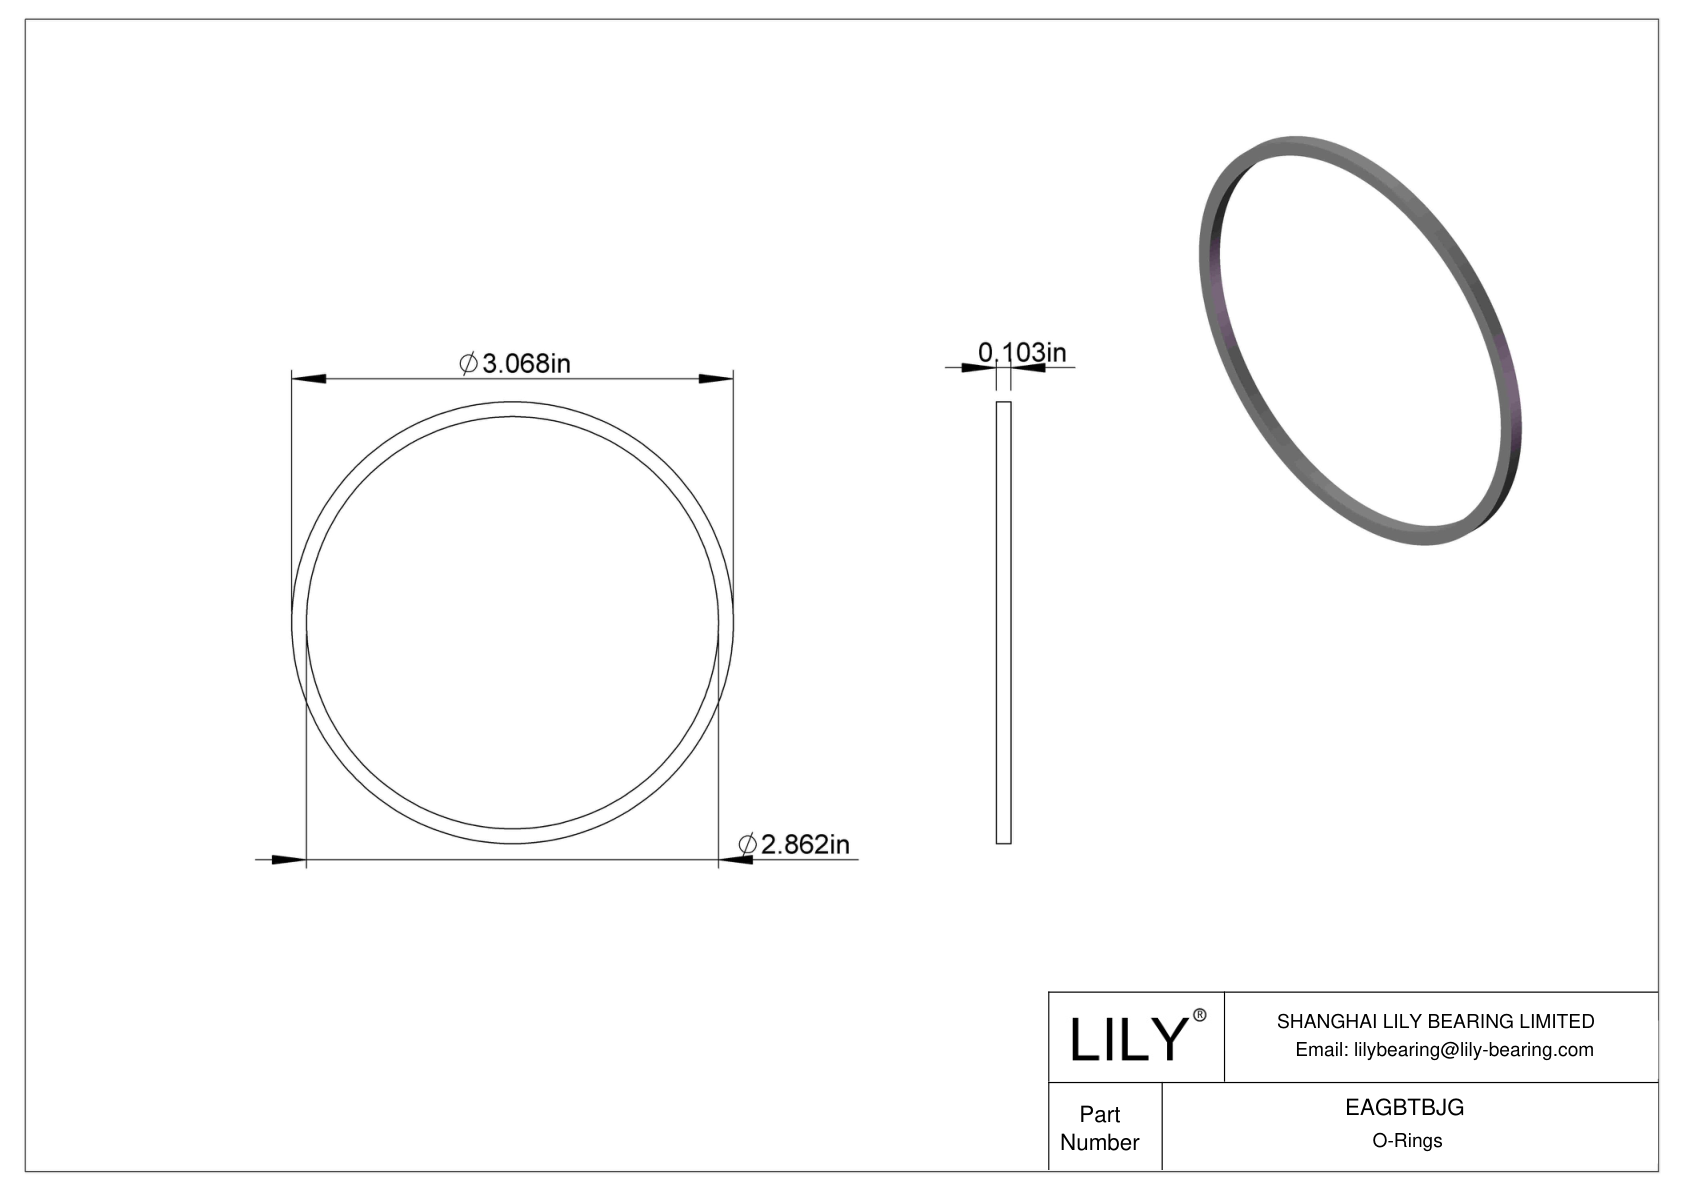 EAGBTBJG Oil Resistant O-Rings Square cad drawing